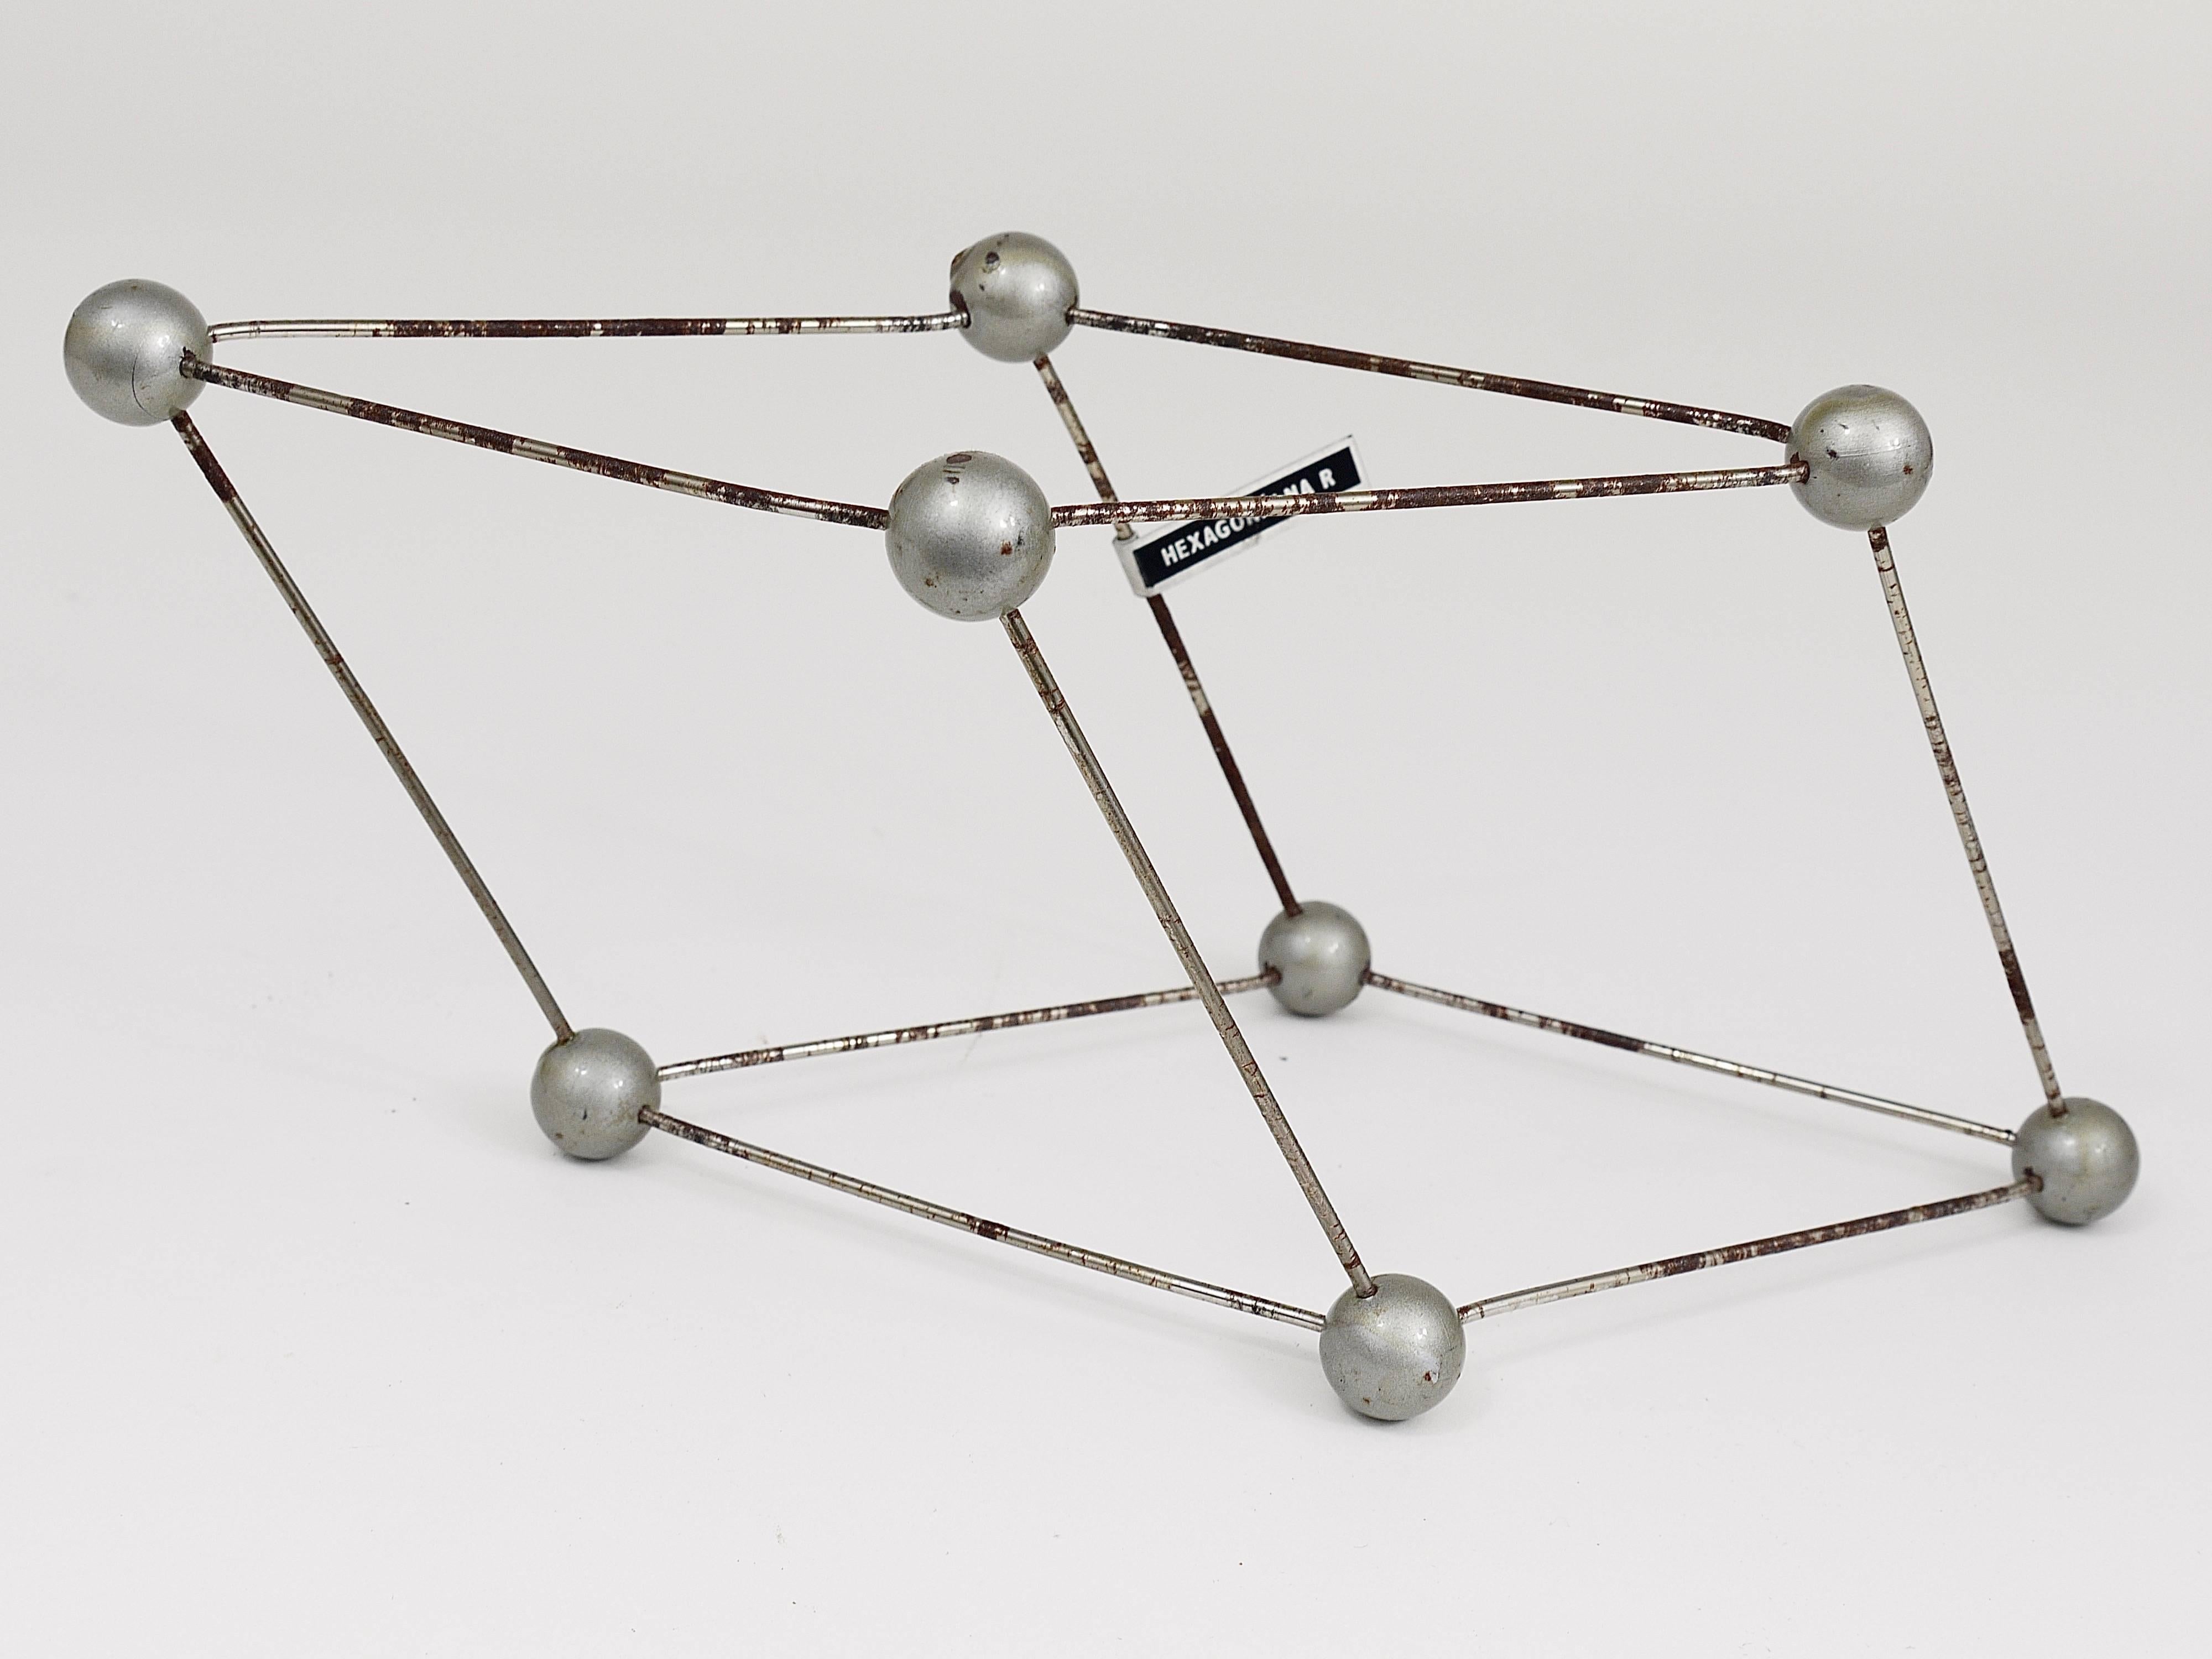 Metal Set of Seven Different Scientific Crystal Molecular Models from the 1950s